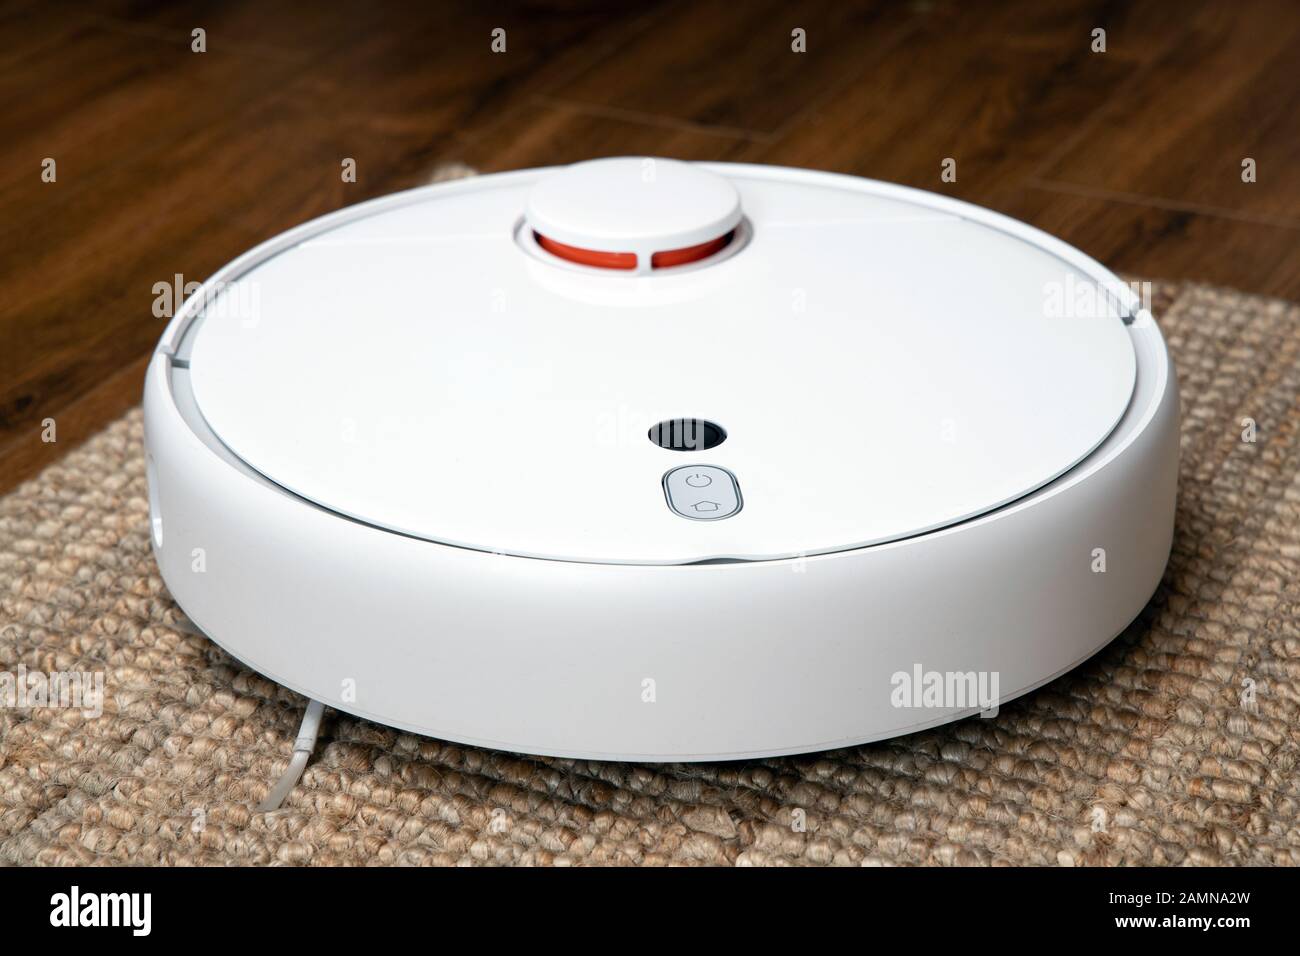 Robotic vacuum cleaner cleans the room from dust and debris, technological progress. Stock Photo